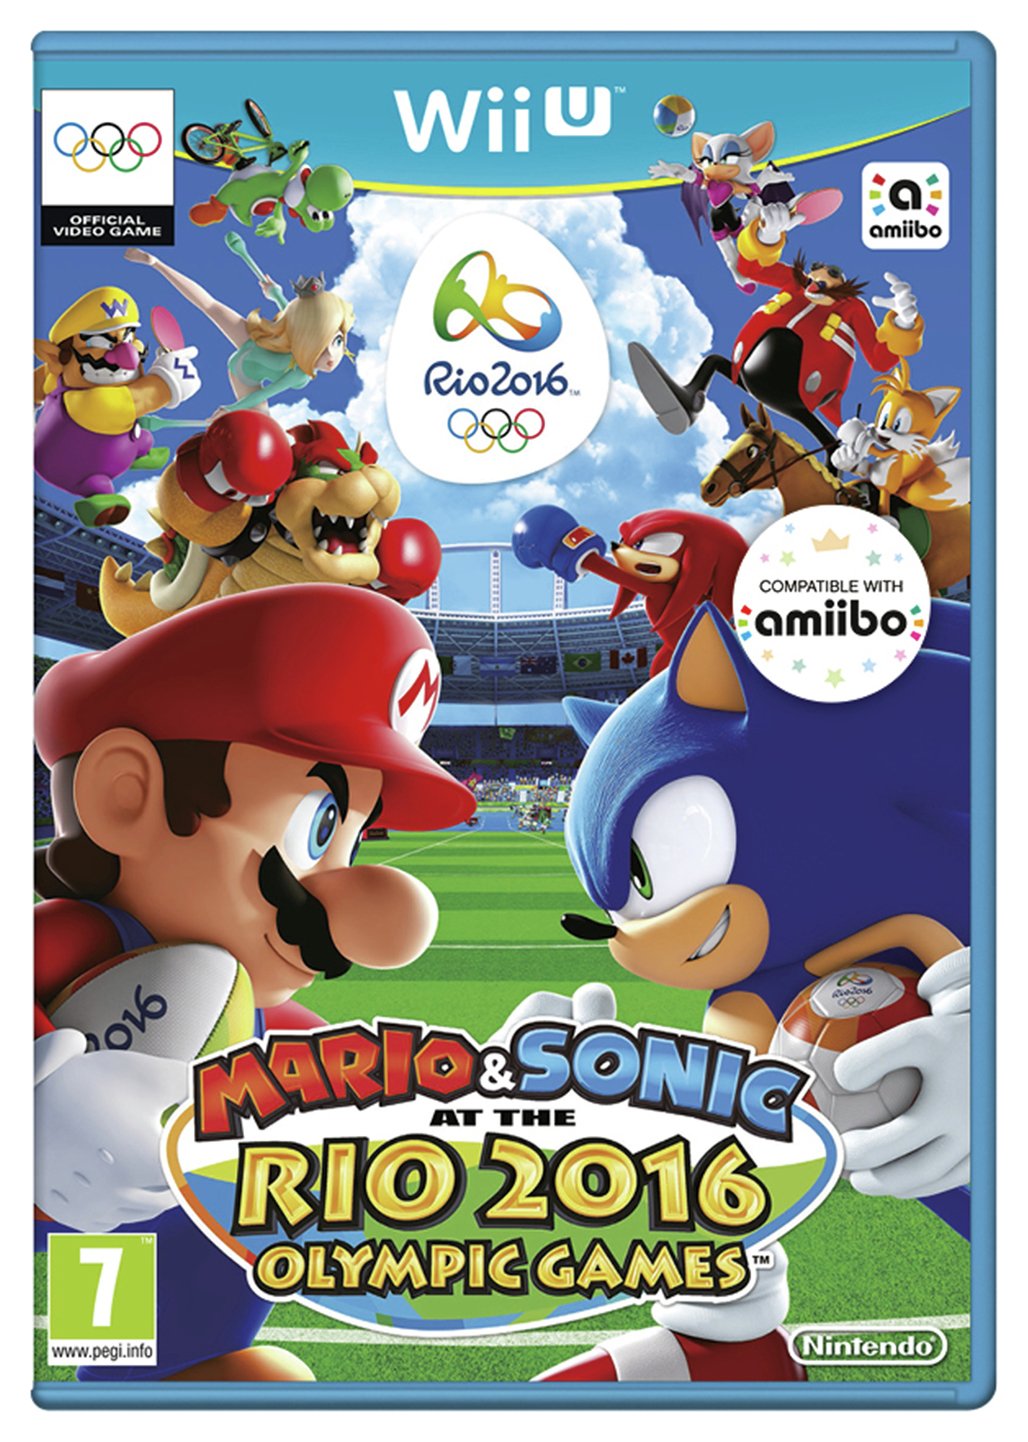 Mario and Sonic Rio 2016 Olympic Games Wii U Game. Review